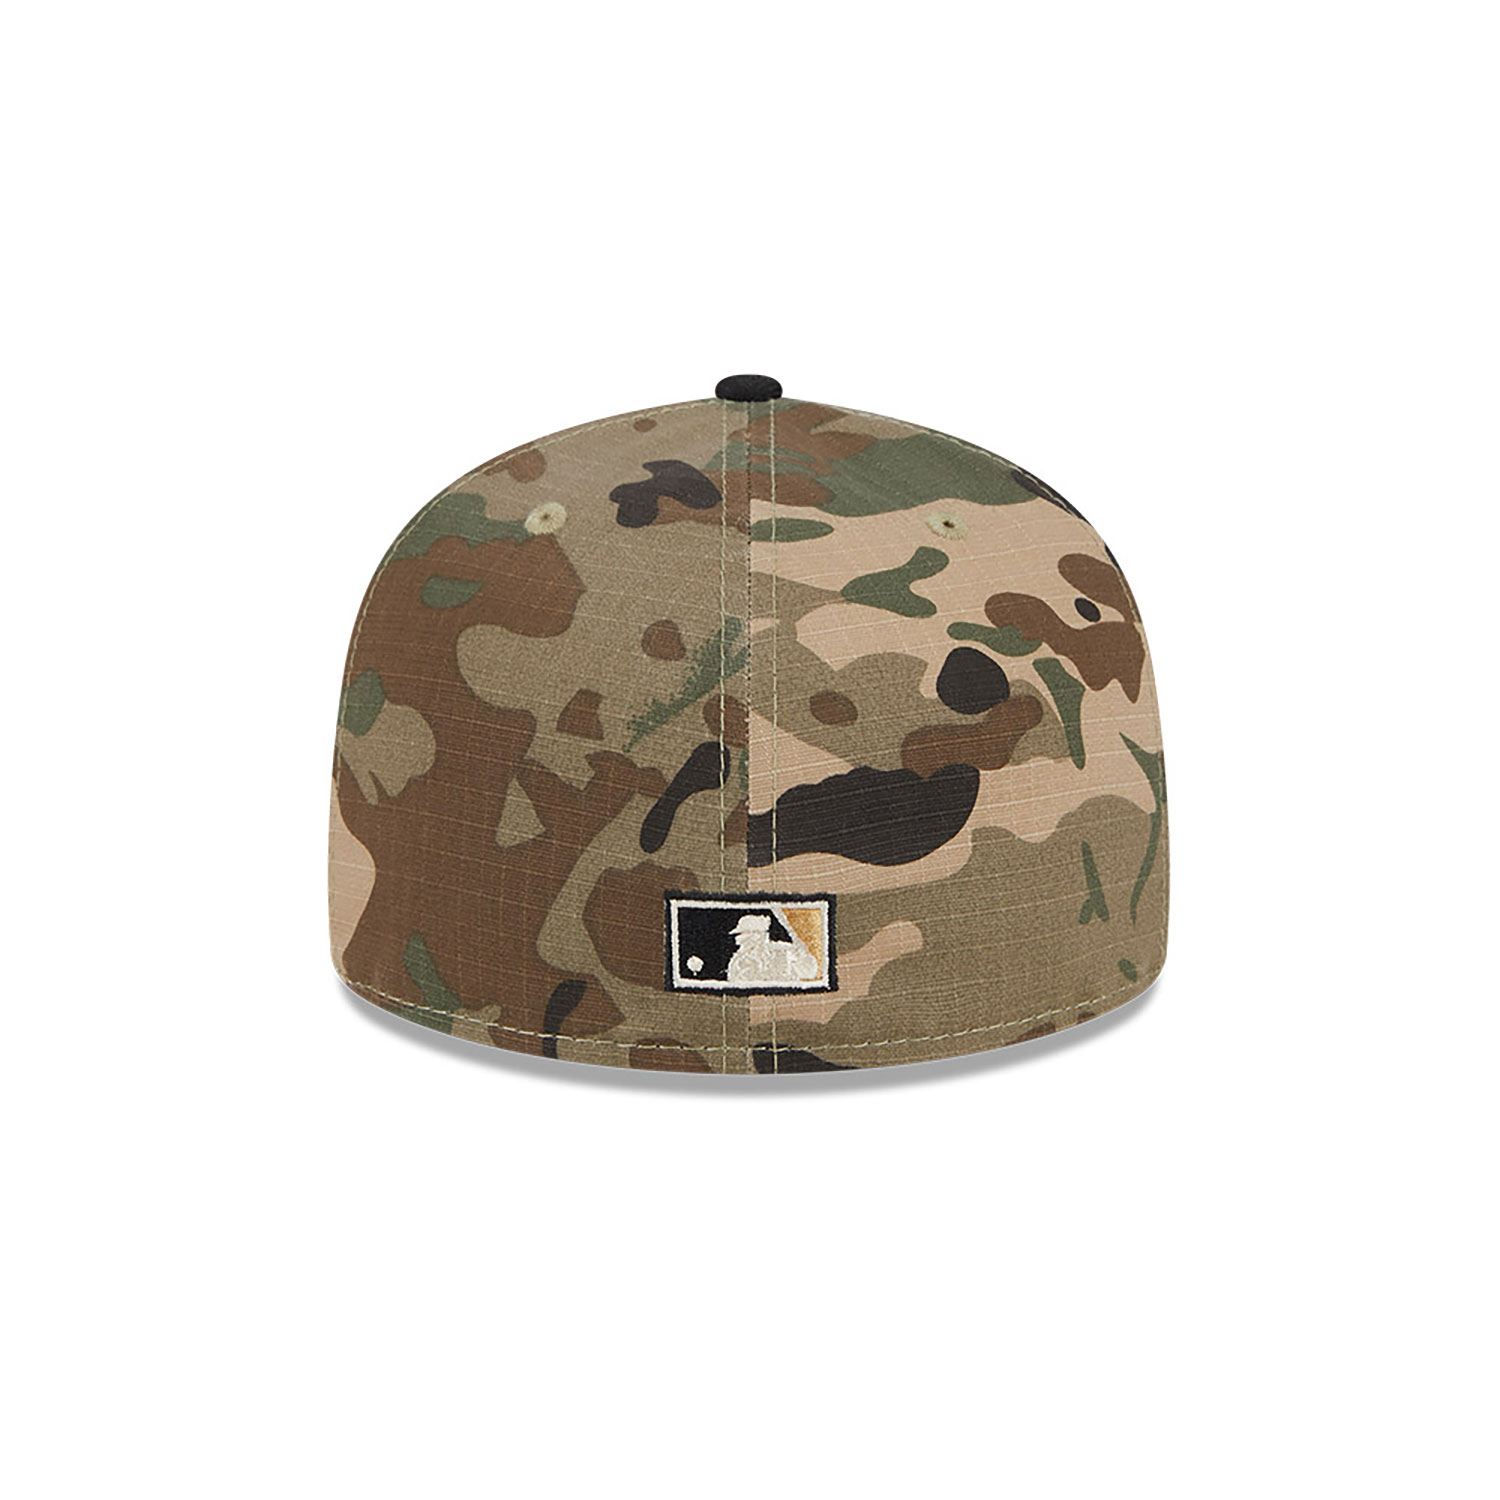 Miami Marlins Camo Crown All Over Print Green 59FIFTY Fitted Cap